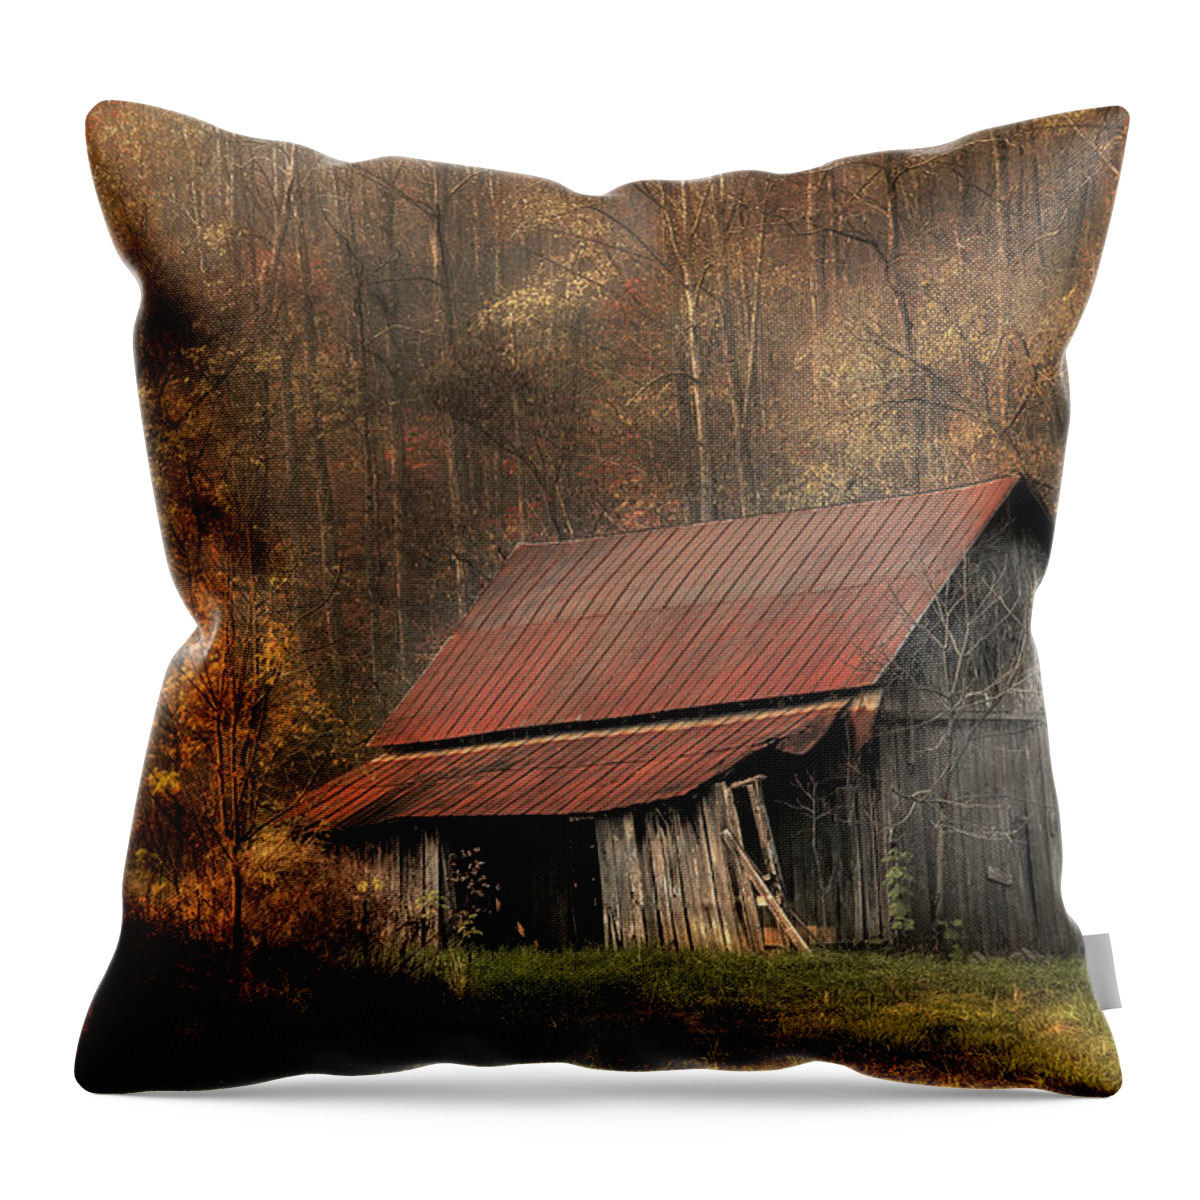 Barn Throw Pillow featuring the photograph Resting Place by Mike Eingle